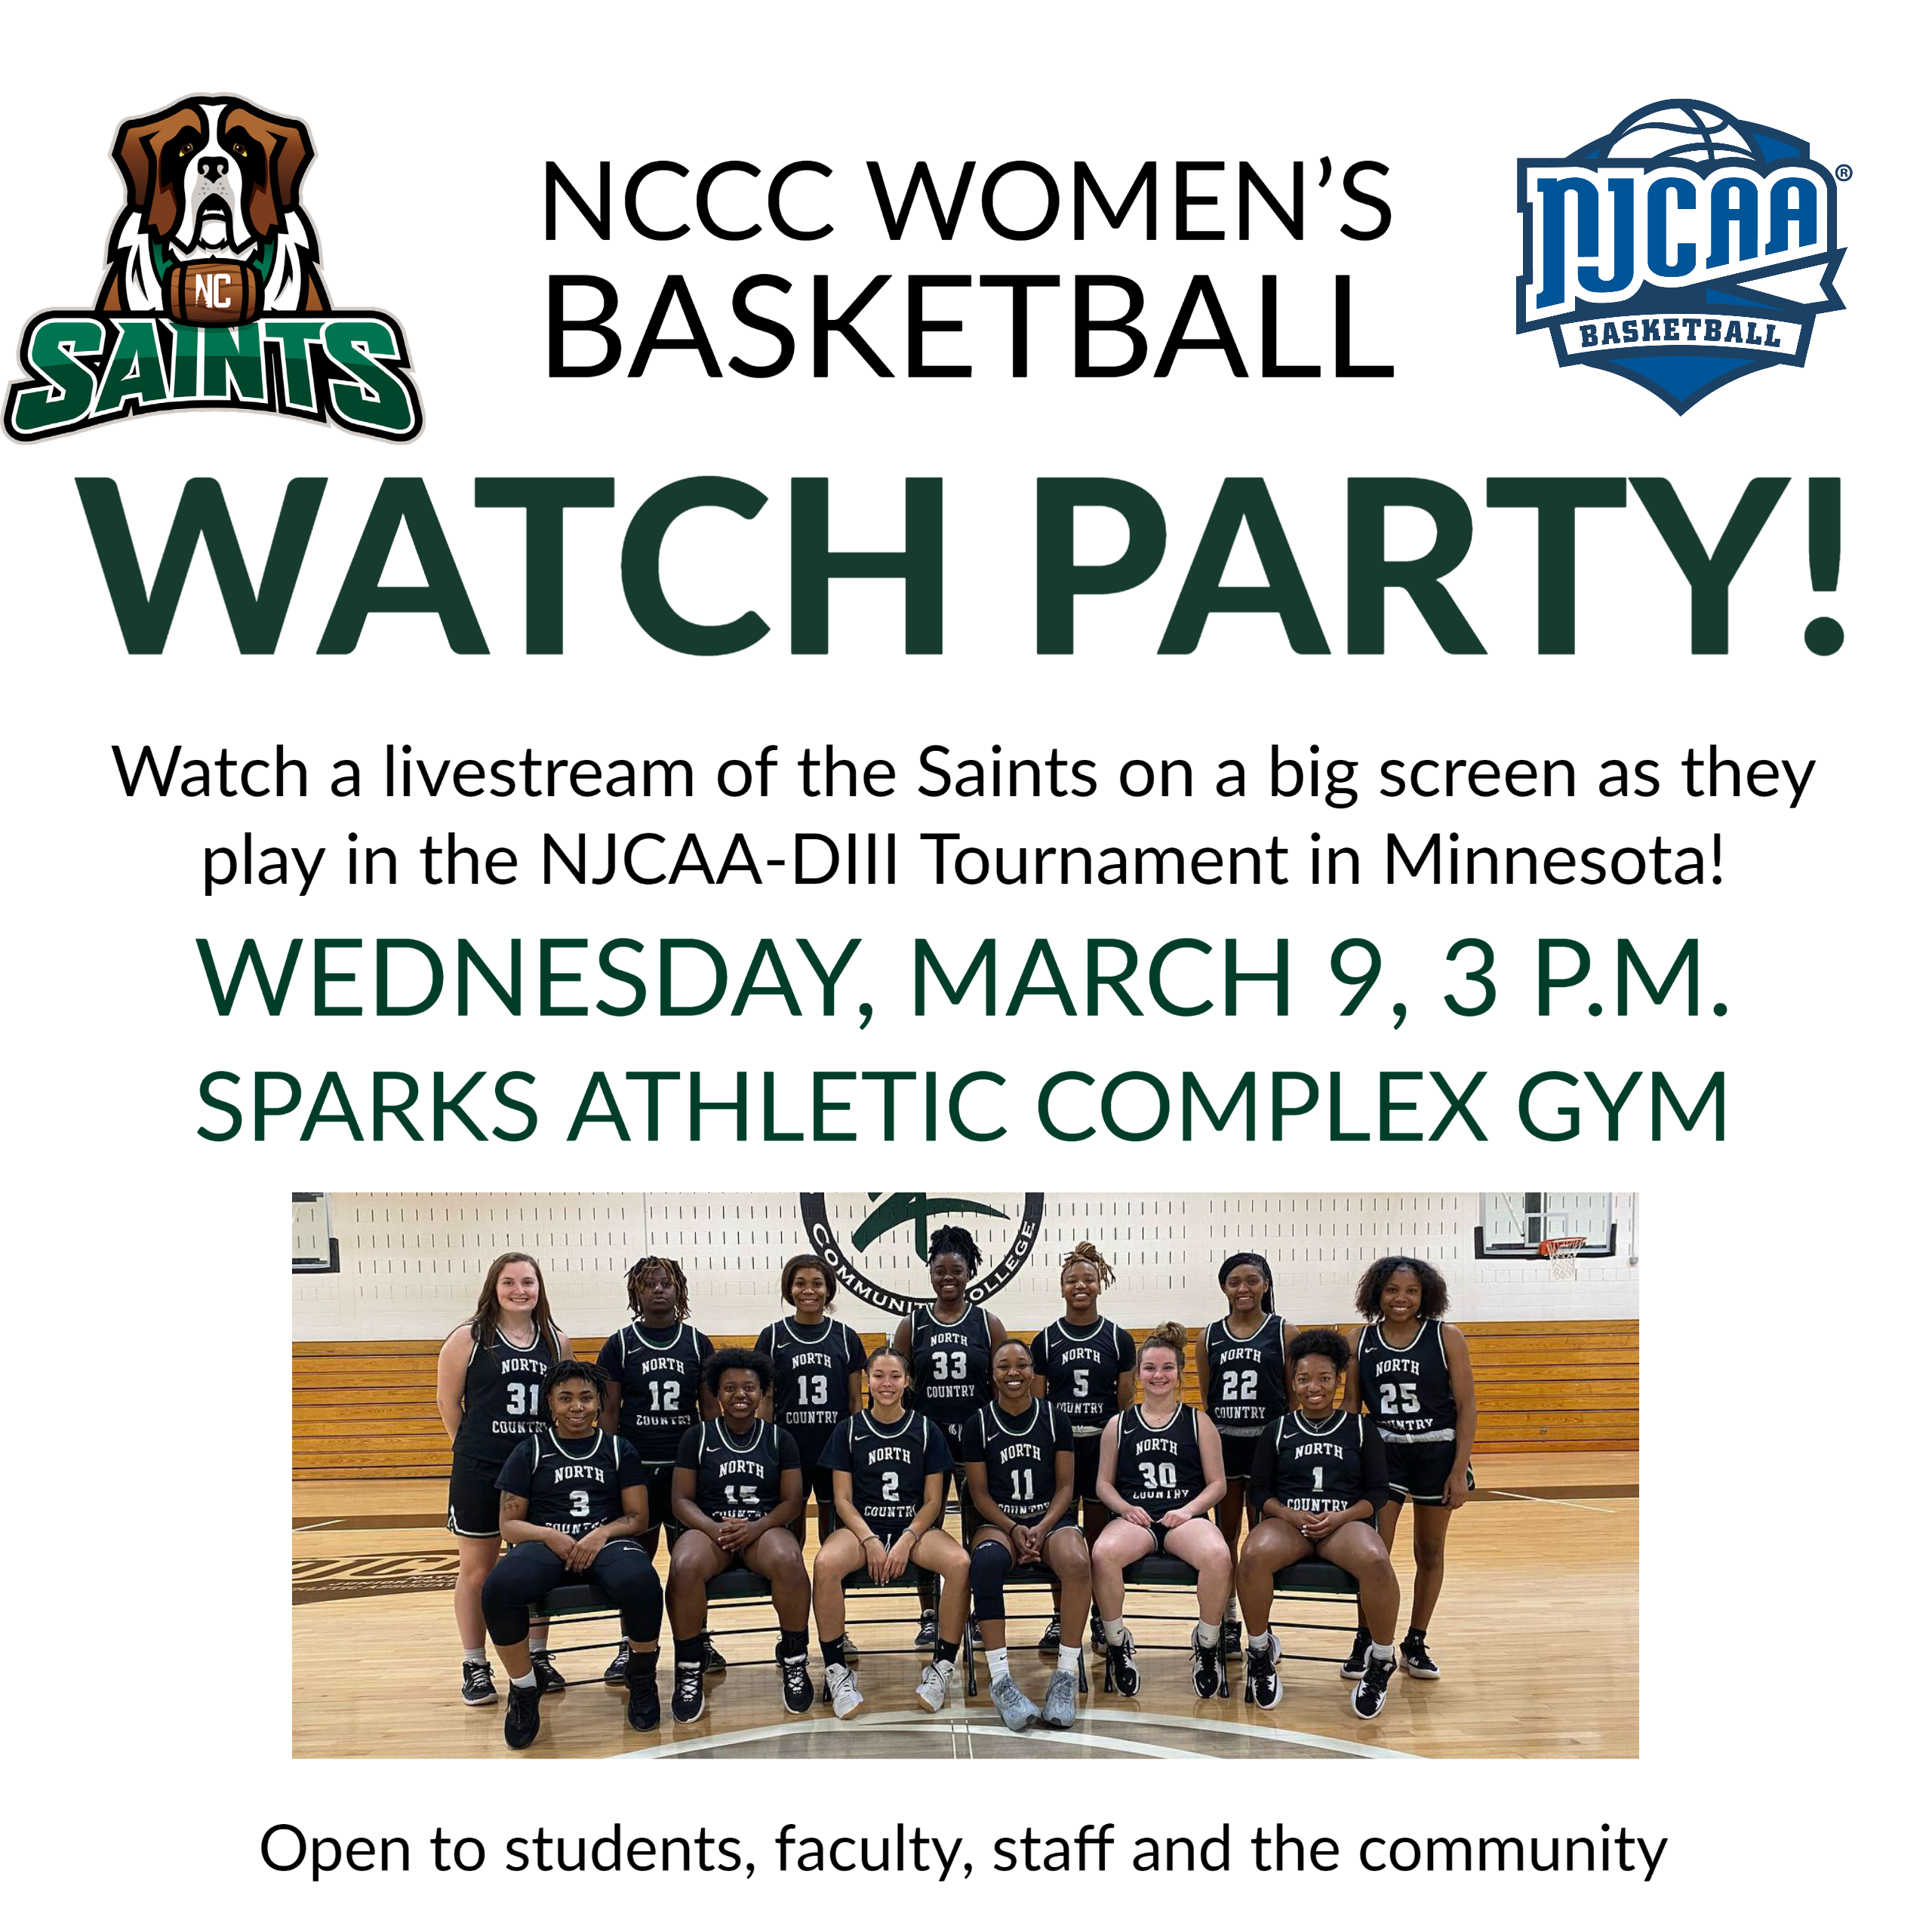 A flyer advertising a watch party for women's basketball game